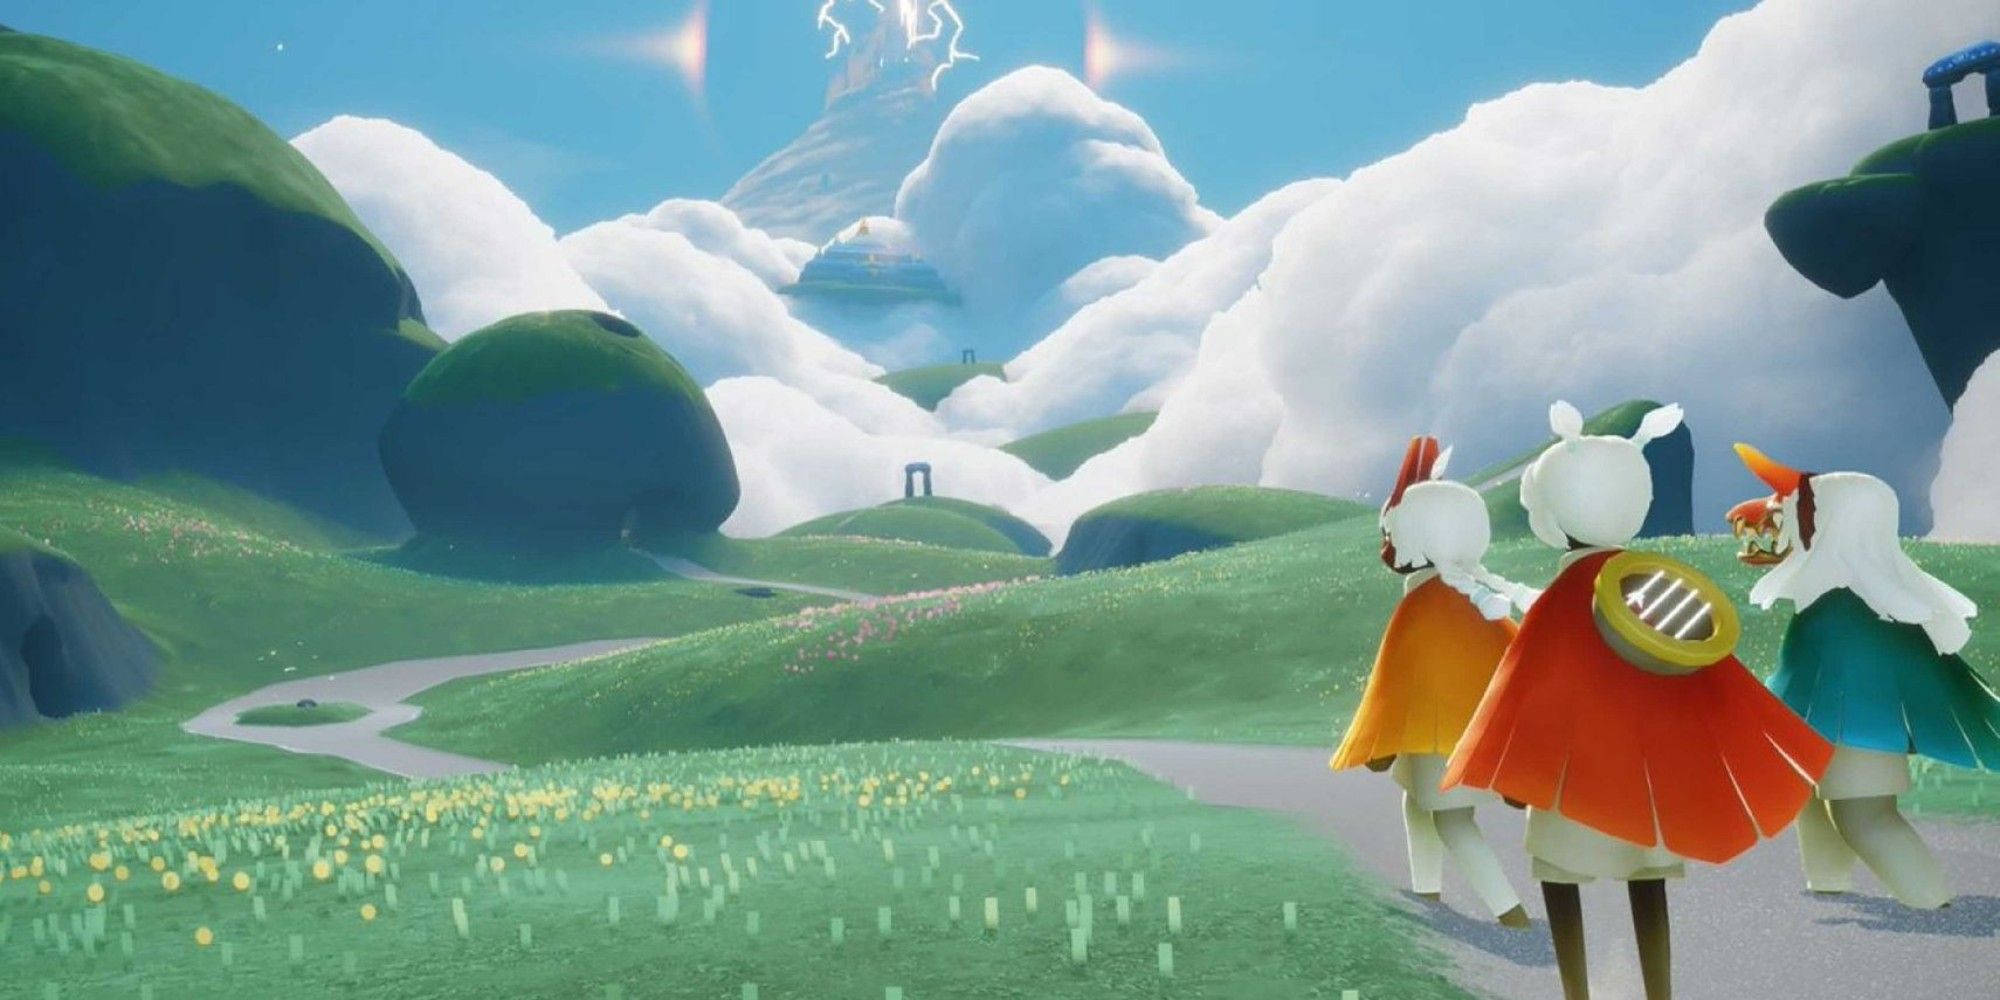 Sky Children of the Light characters looking at a grassy field with a path in the middle